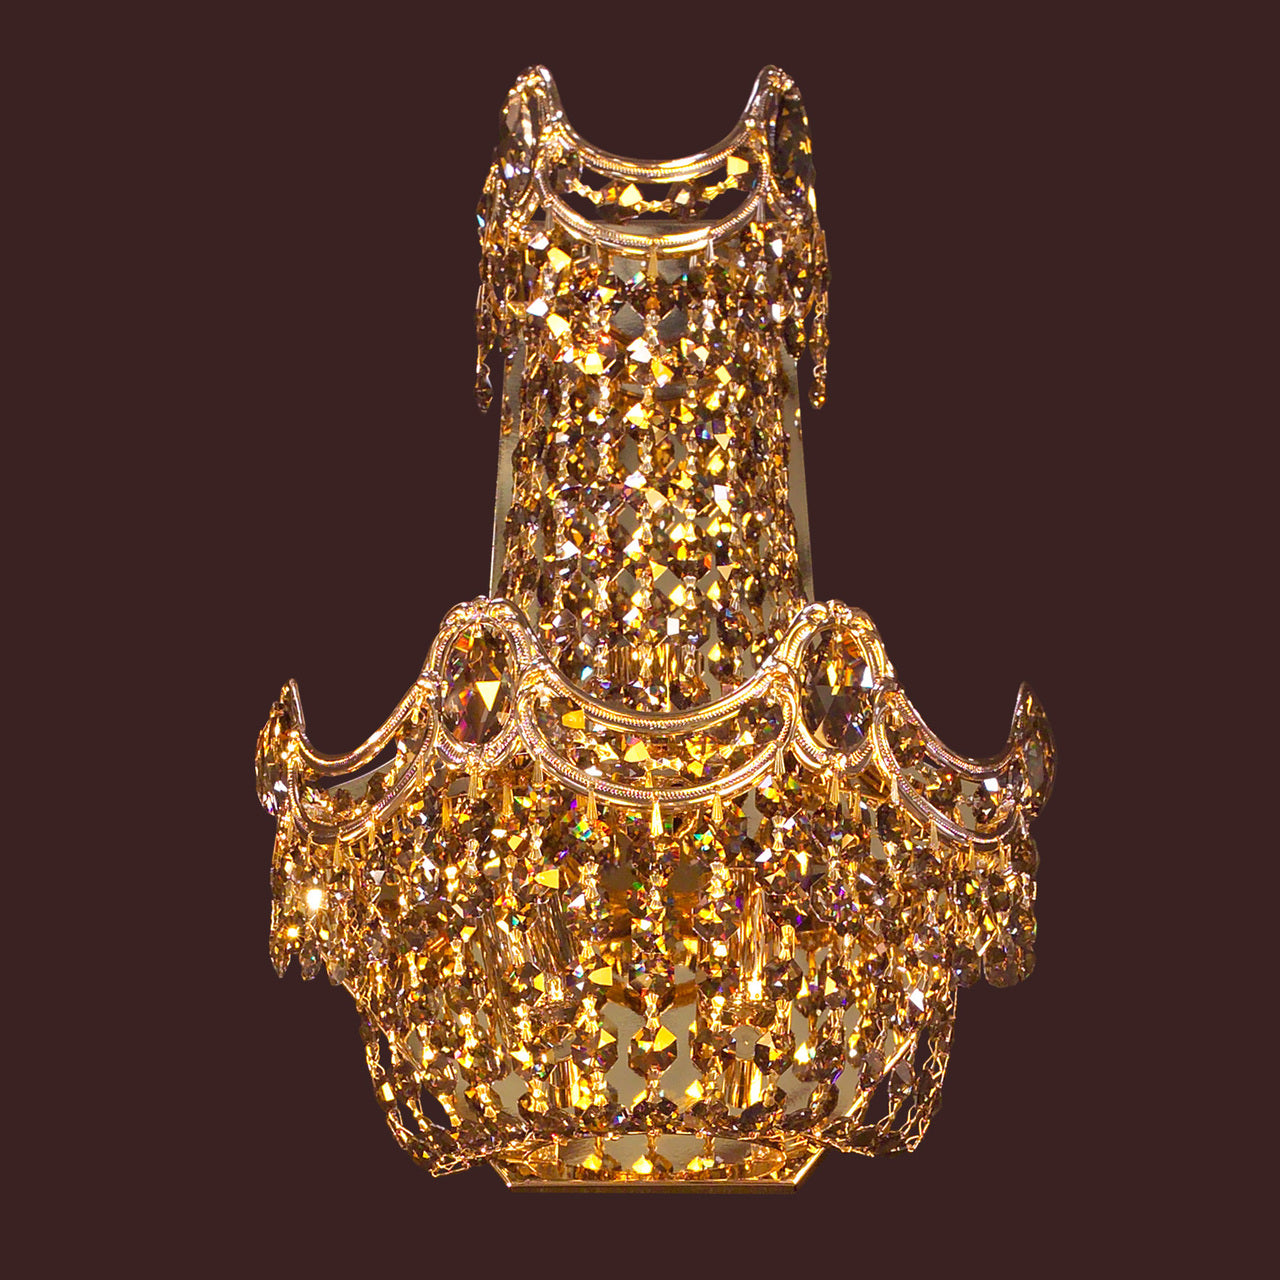 Classic Lighting 1810 G SGT Regency Crystal Wall Sconce in 24k Gold (Imported from Spain)